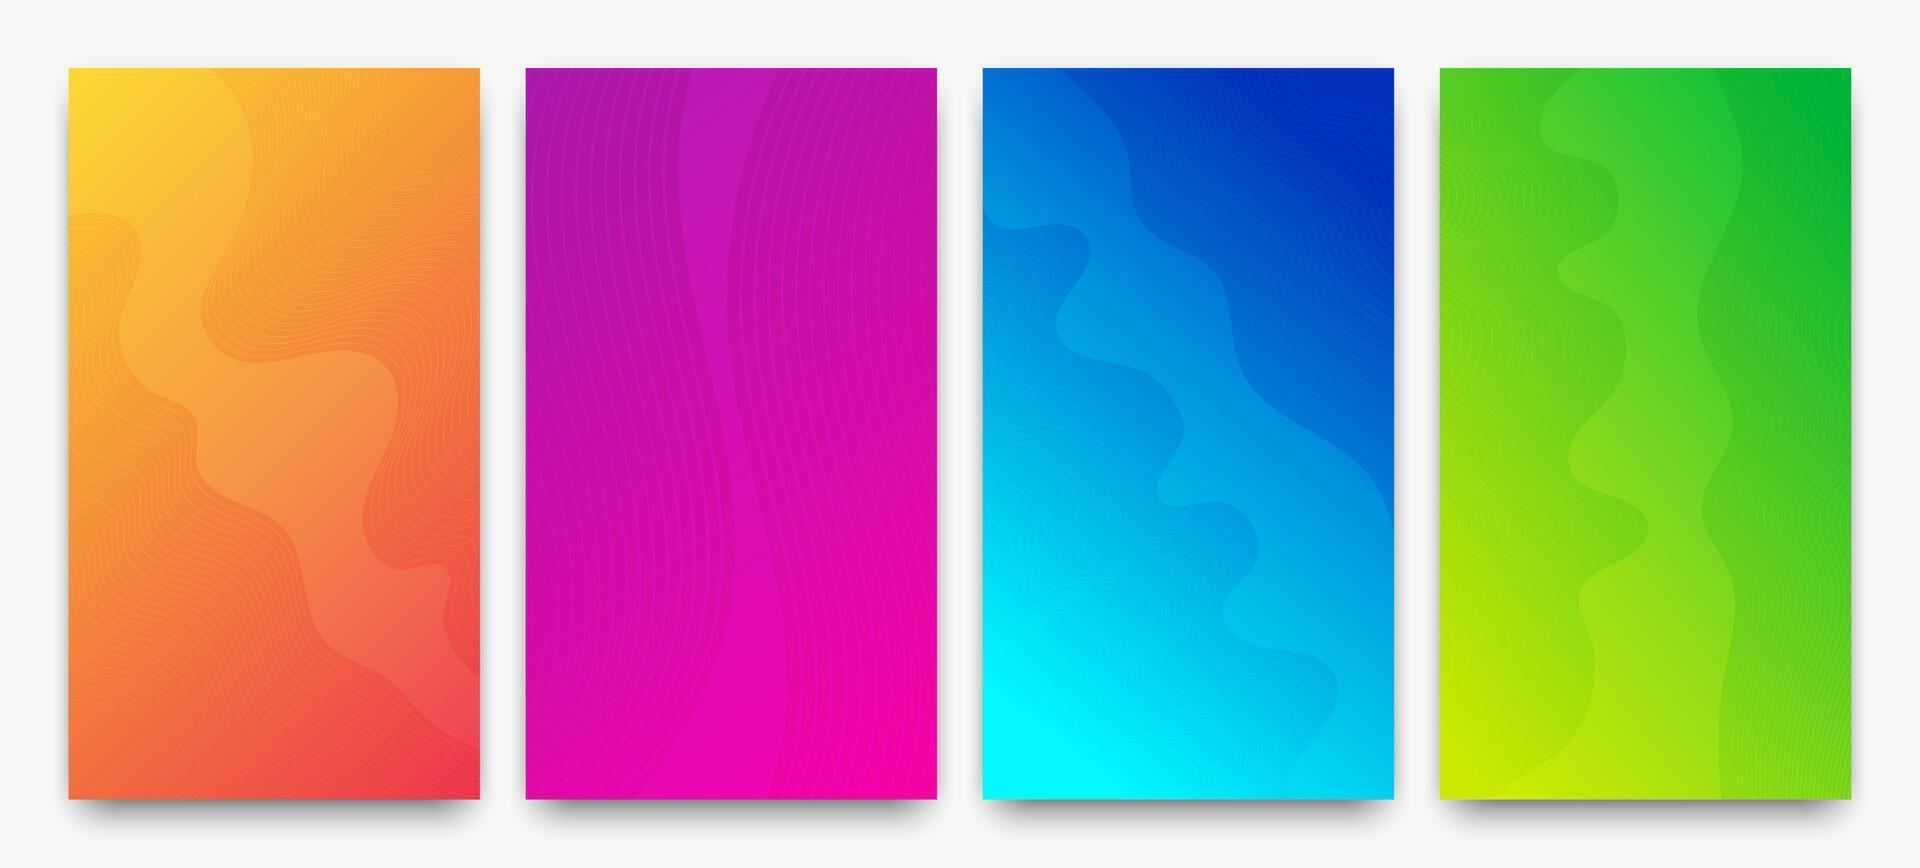 Modern colorful gradient background with lines vector